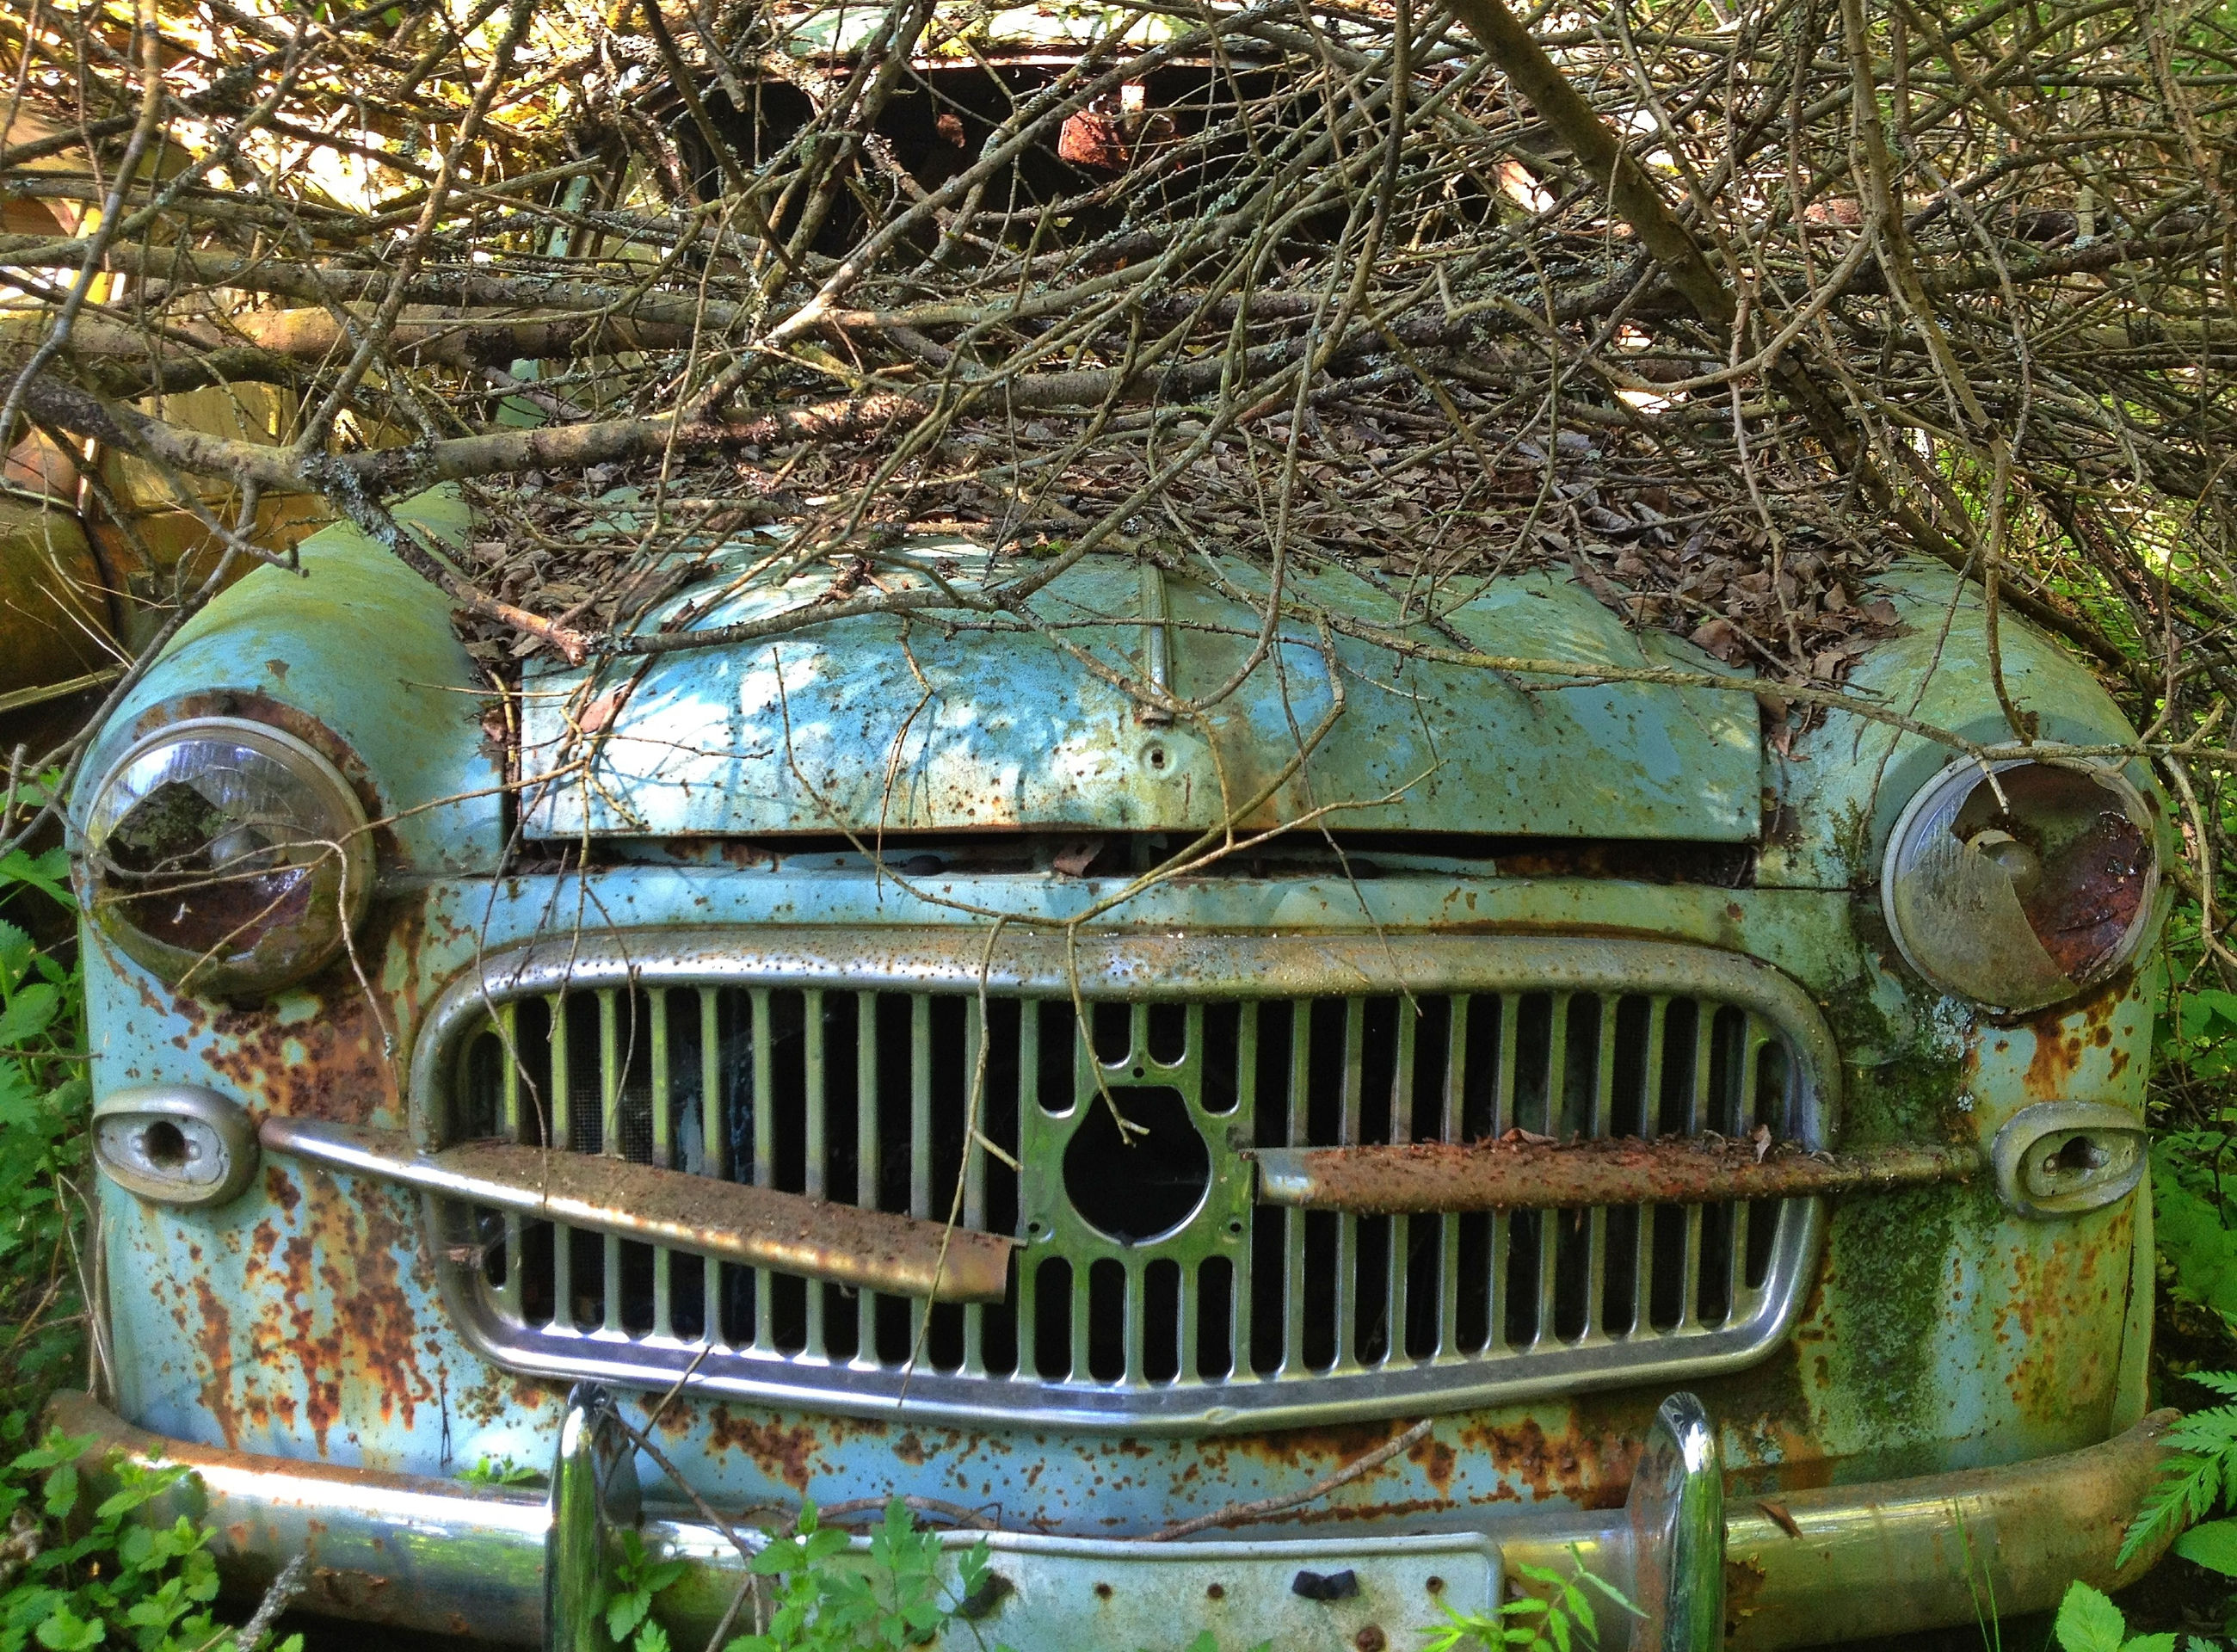 old, abandoned, obsolete, rusty, run-down, metal, land vehicle, tree, damaged, old-fashioned, deterioration, transportation, mode of transport, car, weathered, day, retro styled, no people, outdoors, built structure